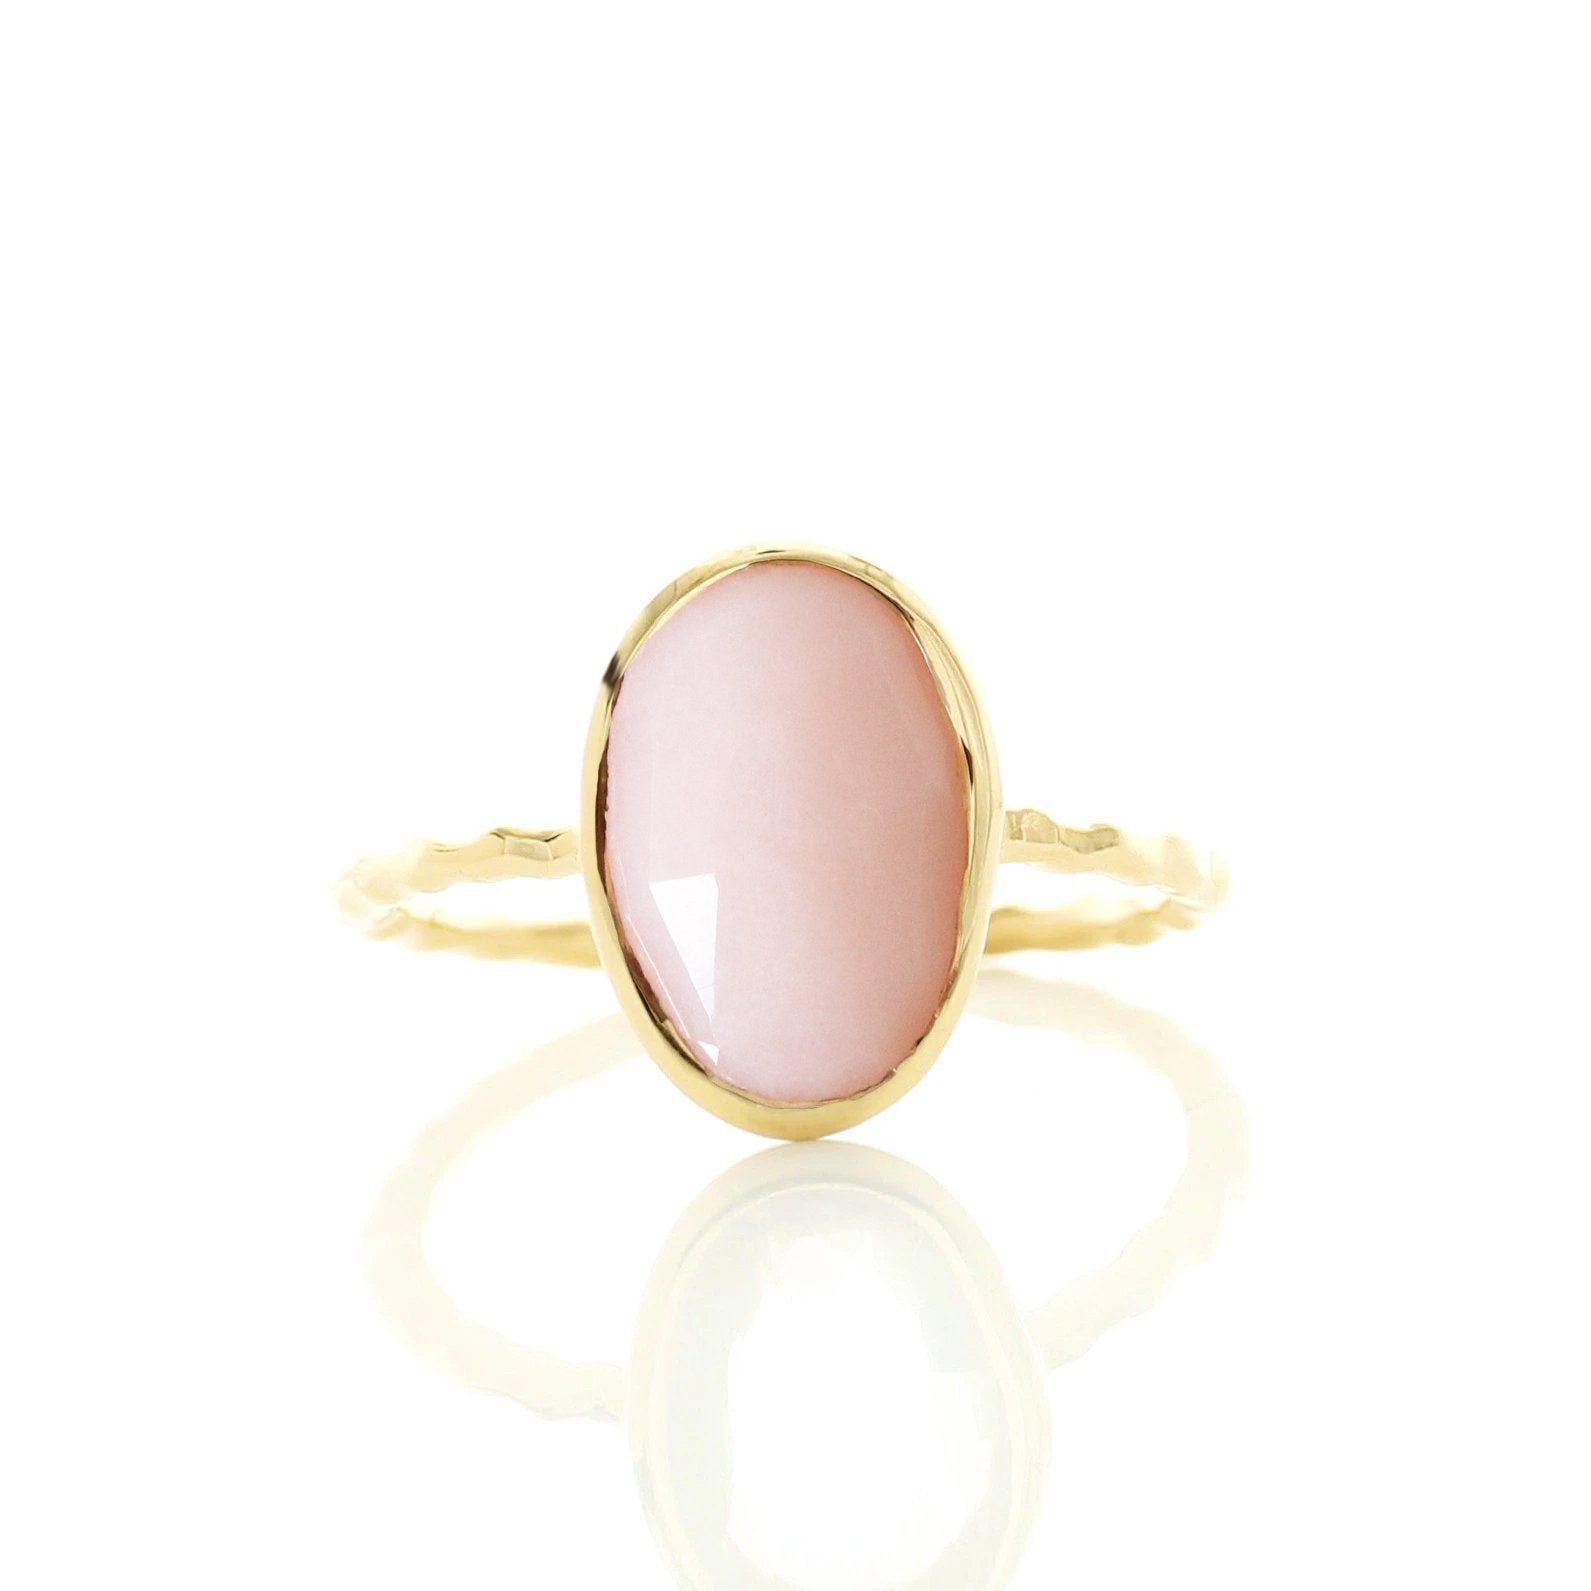 PROTECT OVAL RING - PINK OPAL & GOLD - SO PRETTY CARA COTTER